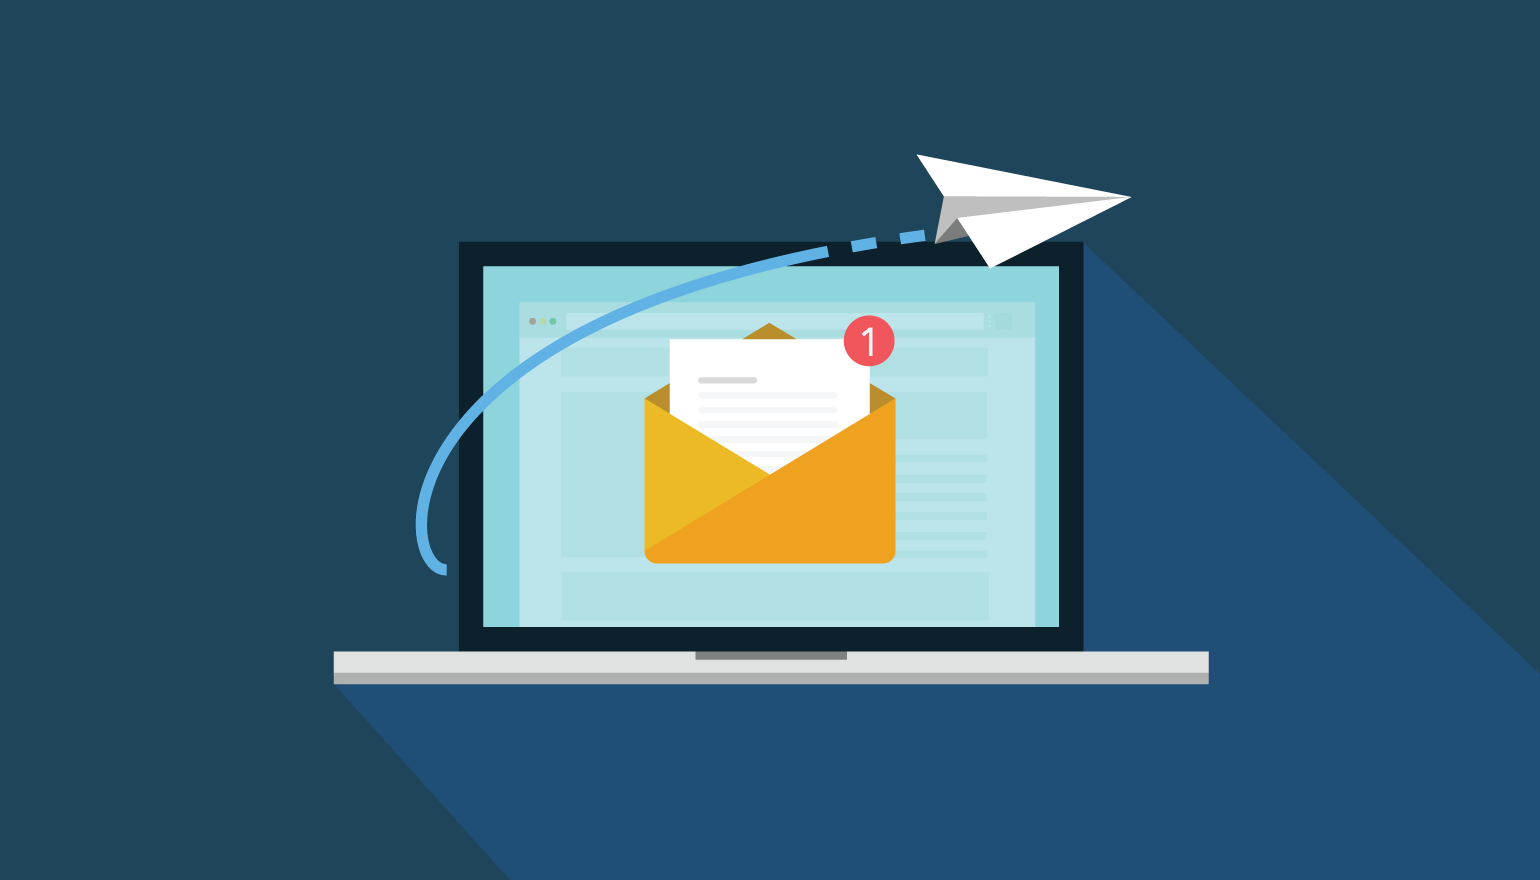 Test Your Spam Score with Mail Tester - MailPoet Knowledge Base